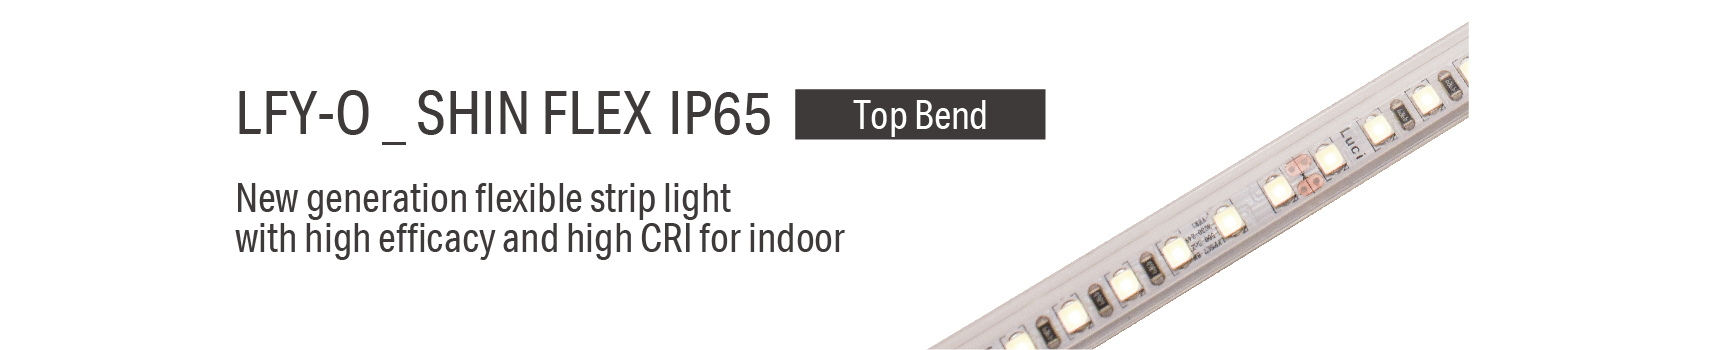 LFY-O _ SHIN FLEX IP65 New generation flexible strip light with high efficacy and high CRI for indoor